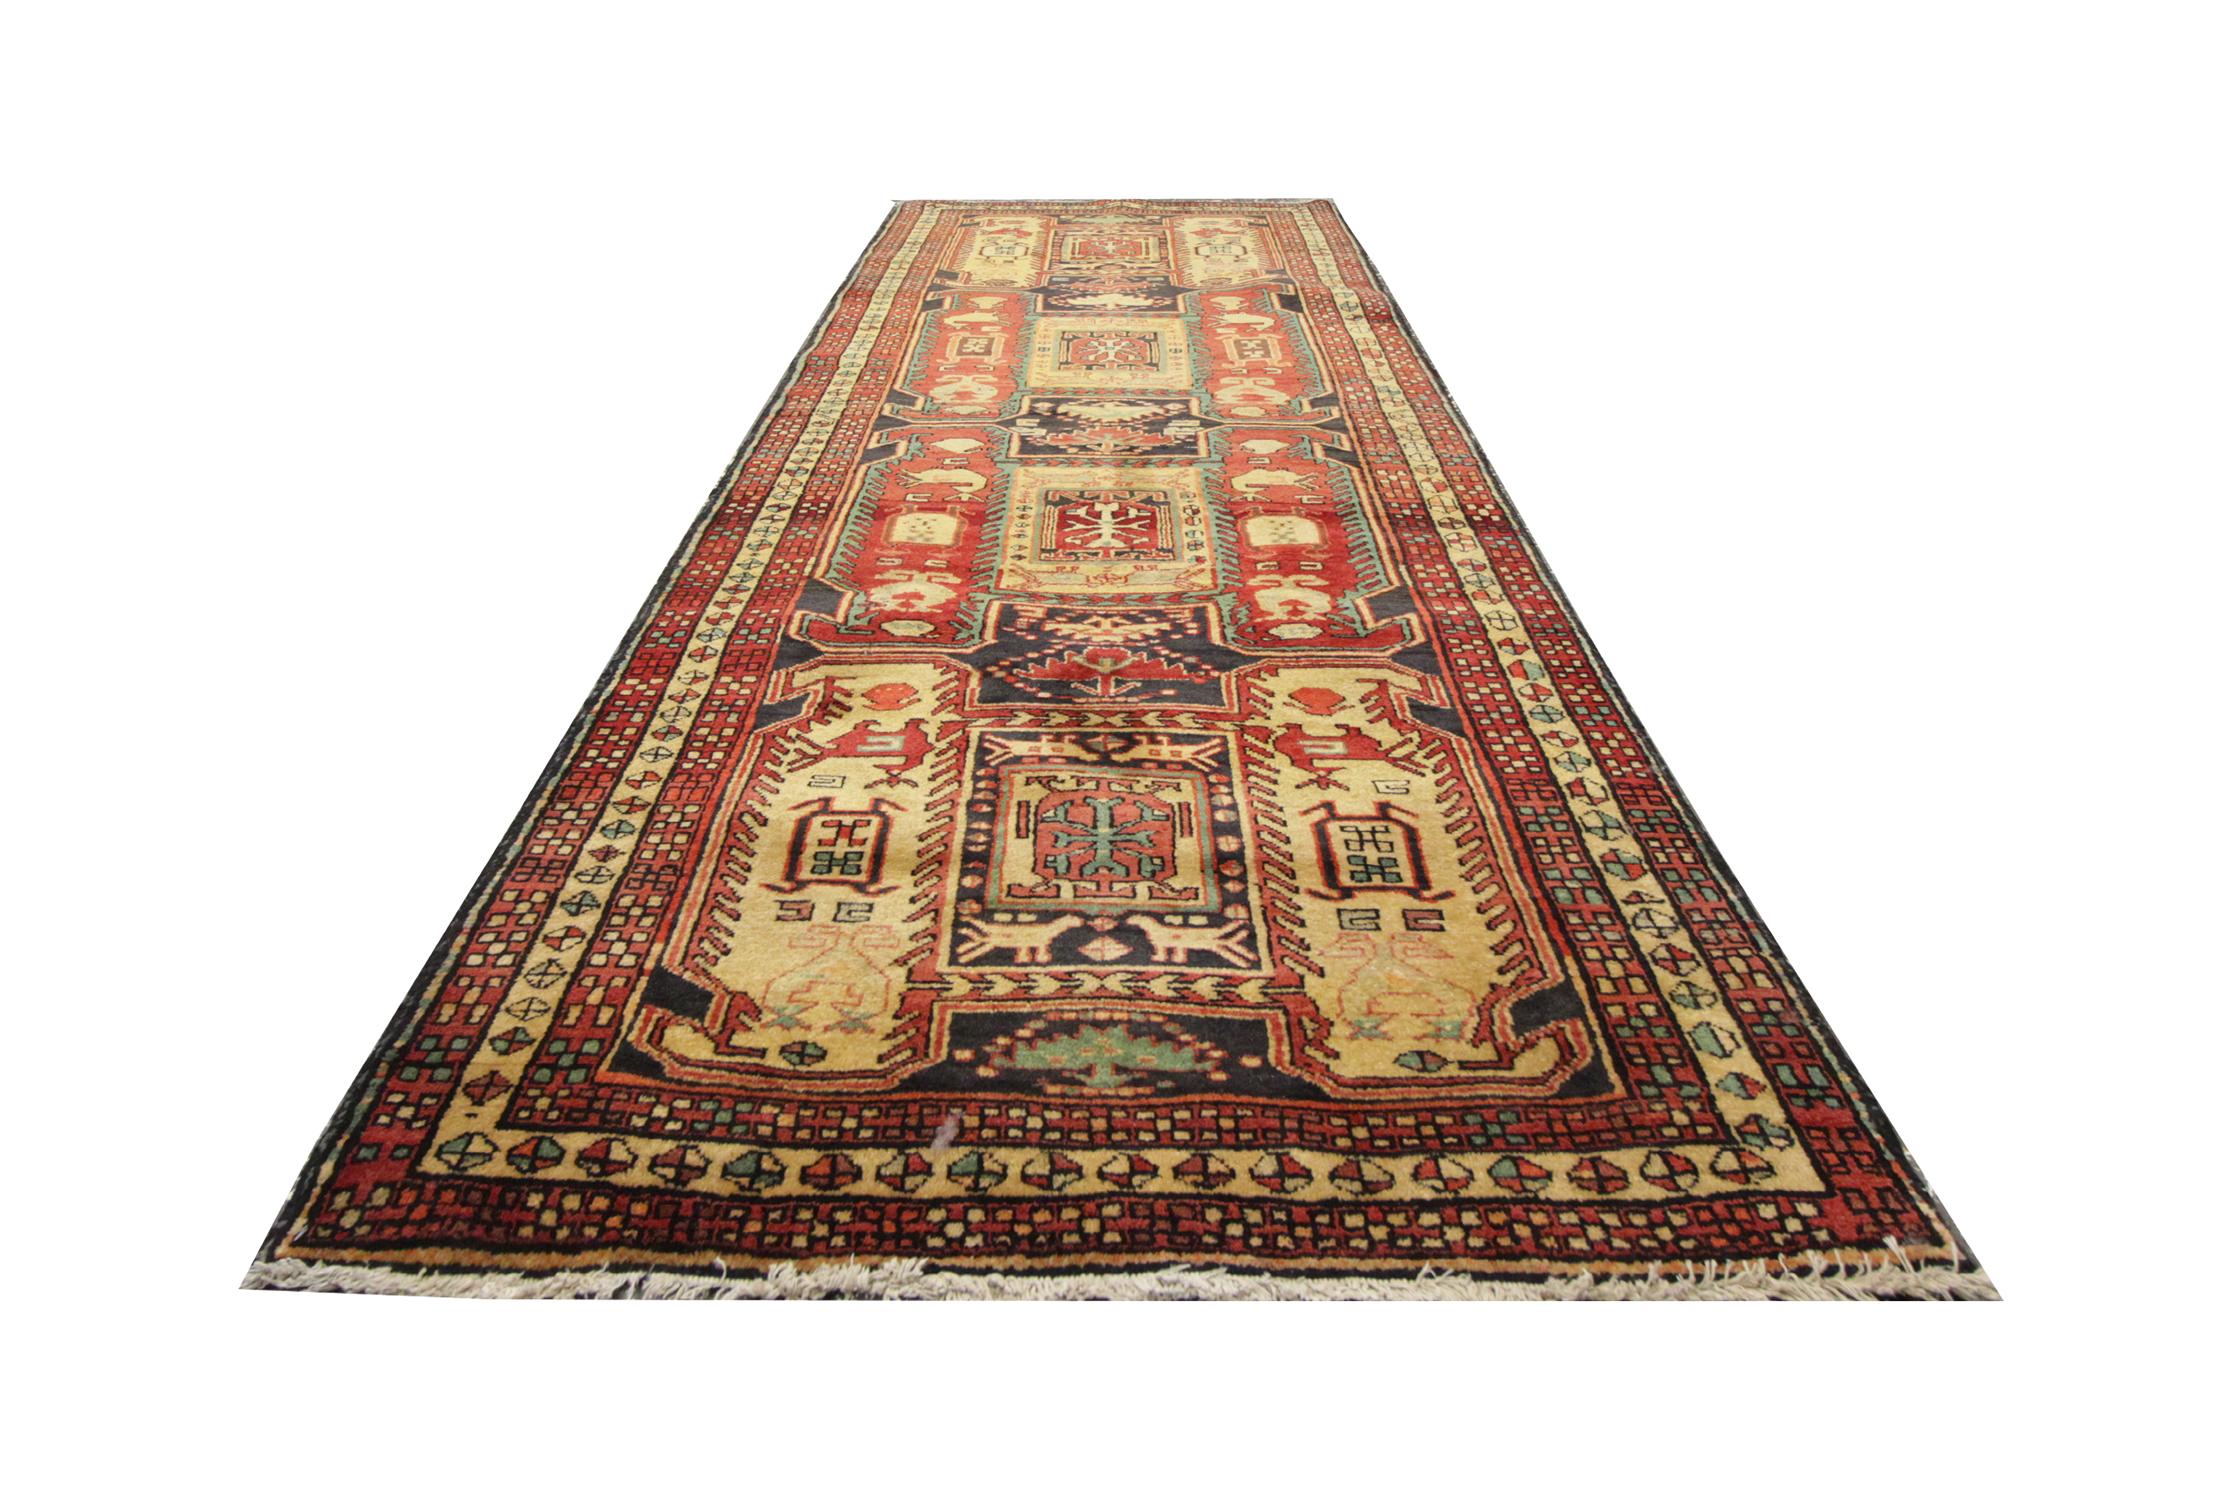 An excellent example of Caucasian carpet oriental rug weaving is from the Kazak region of Azerbaijan. Though these Goldish-Brown ground all-over patterned rugs may seem like from a distance, this woven rug has a great range of rich organic vegetable